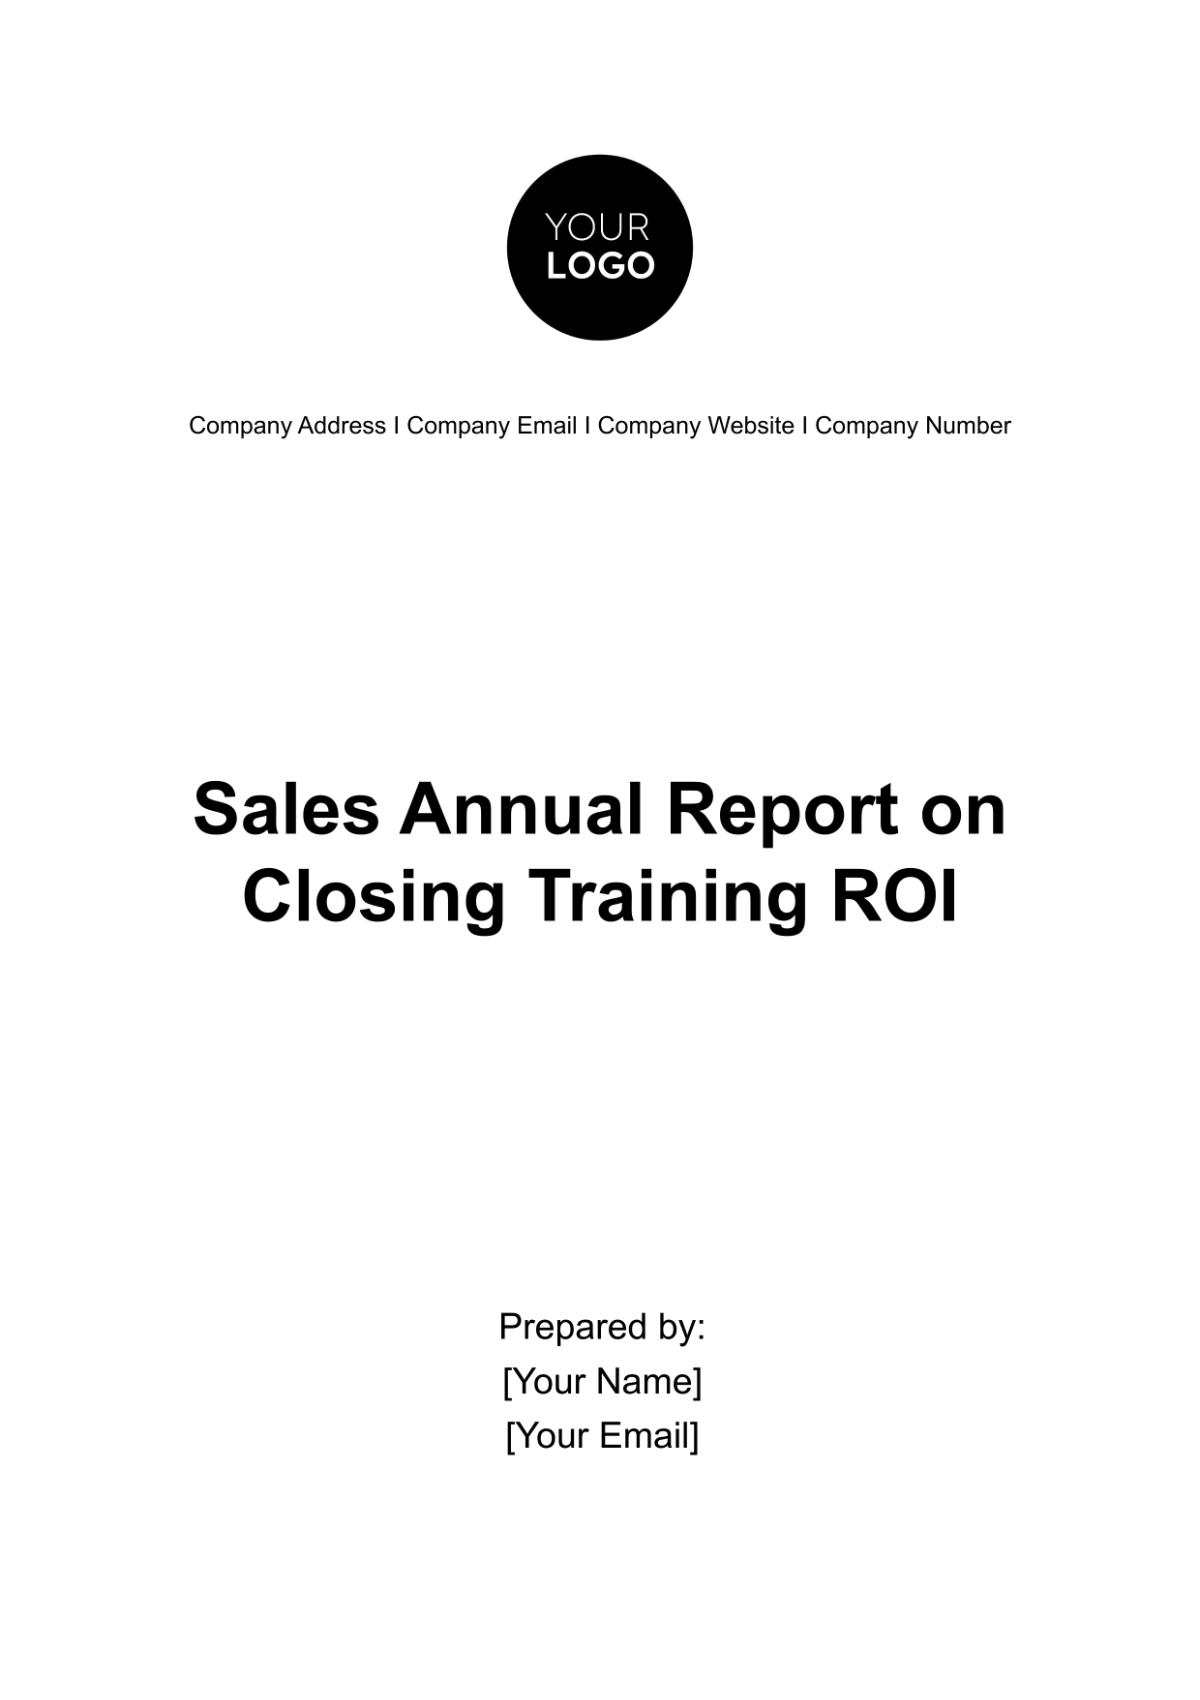 Sales Annual Report on Closing Training ROI Template